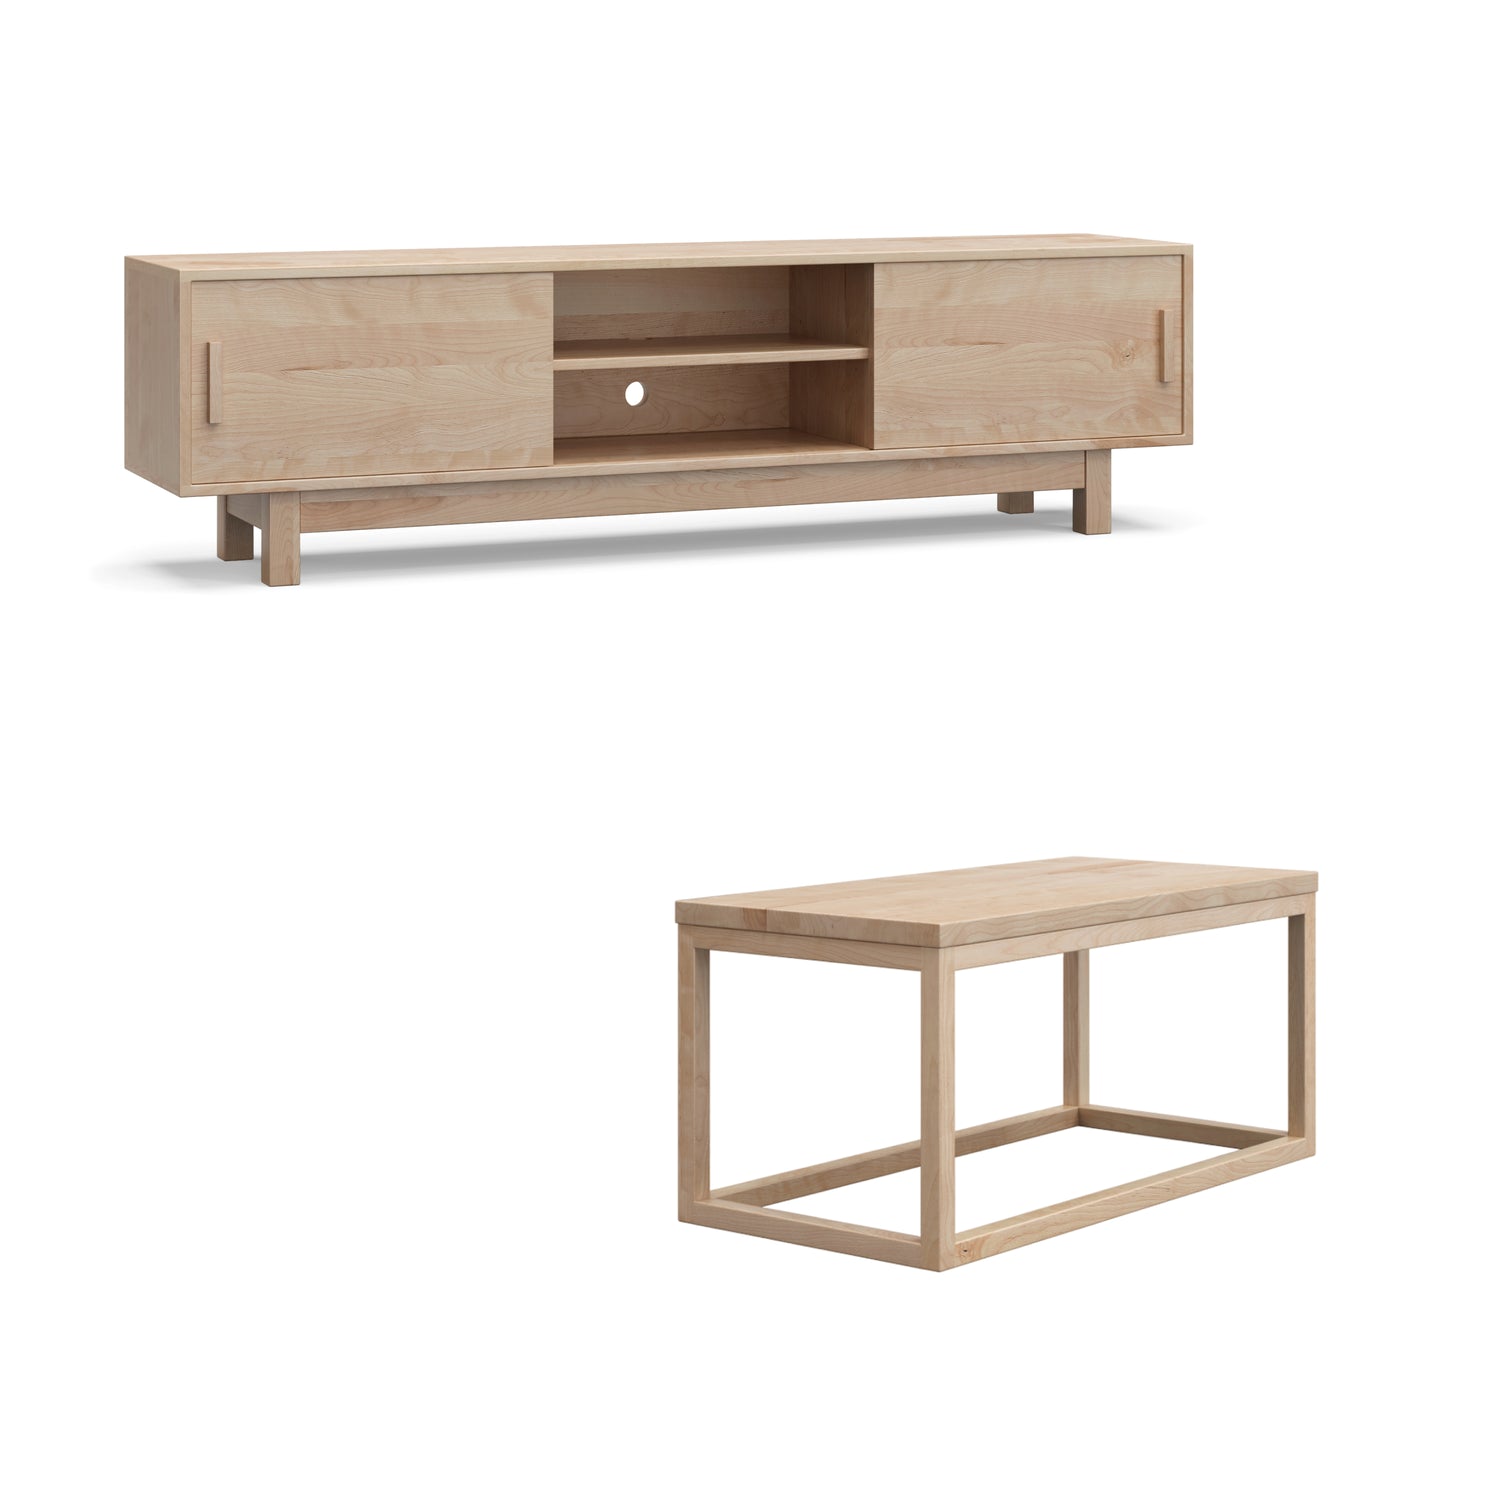 OOM TV unit and Prisme coffee table